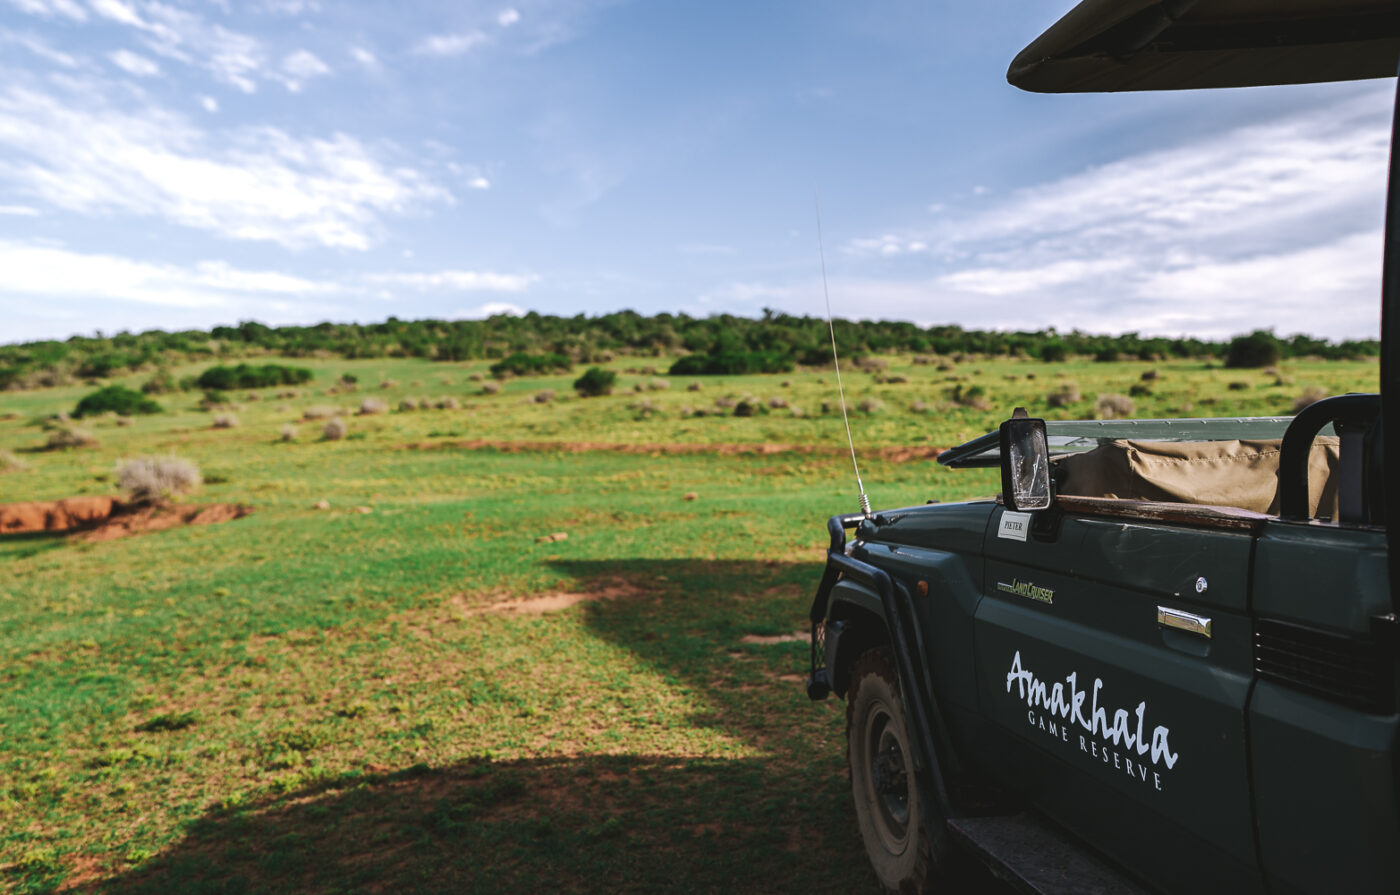 On a safari in Amakhala Private Game Reserve